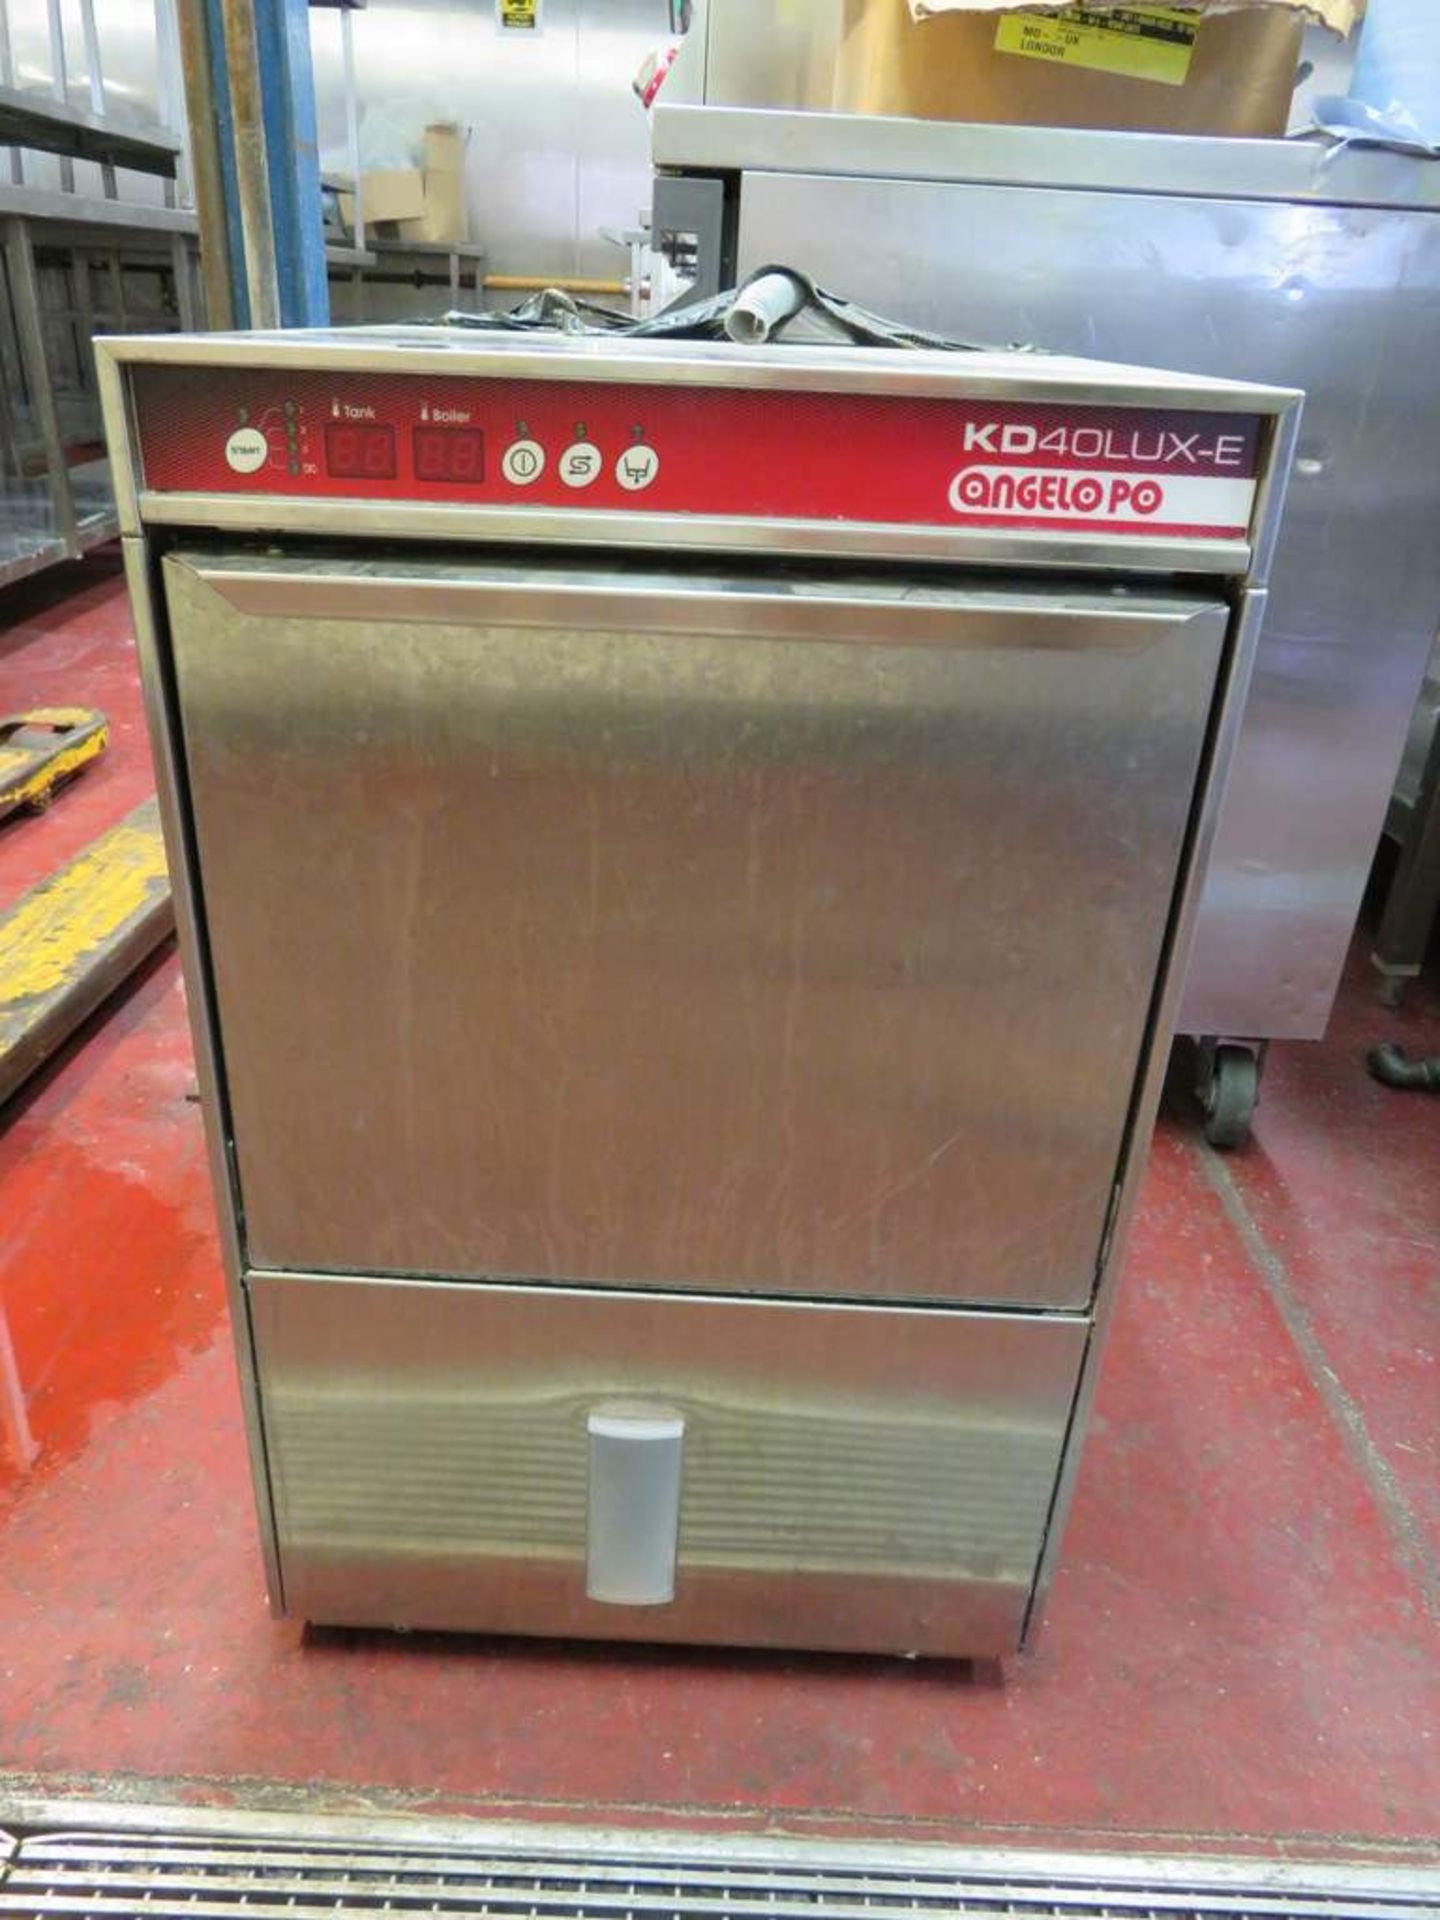 Angelo Po Stainless steel undercounter glass washer